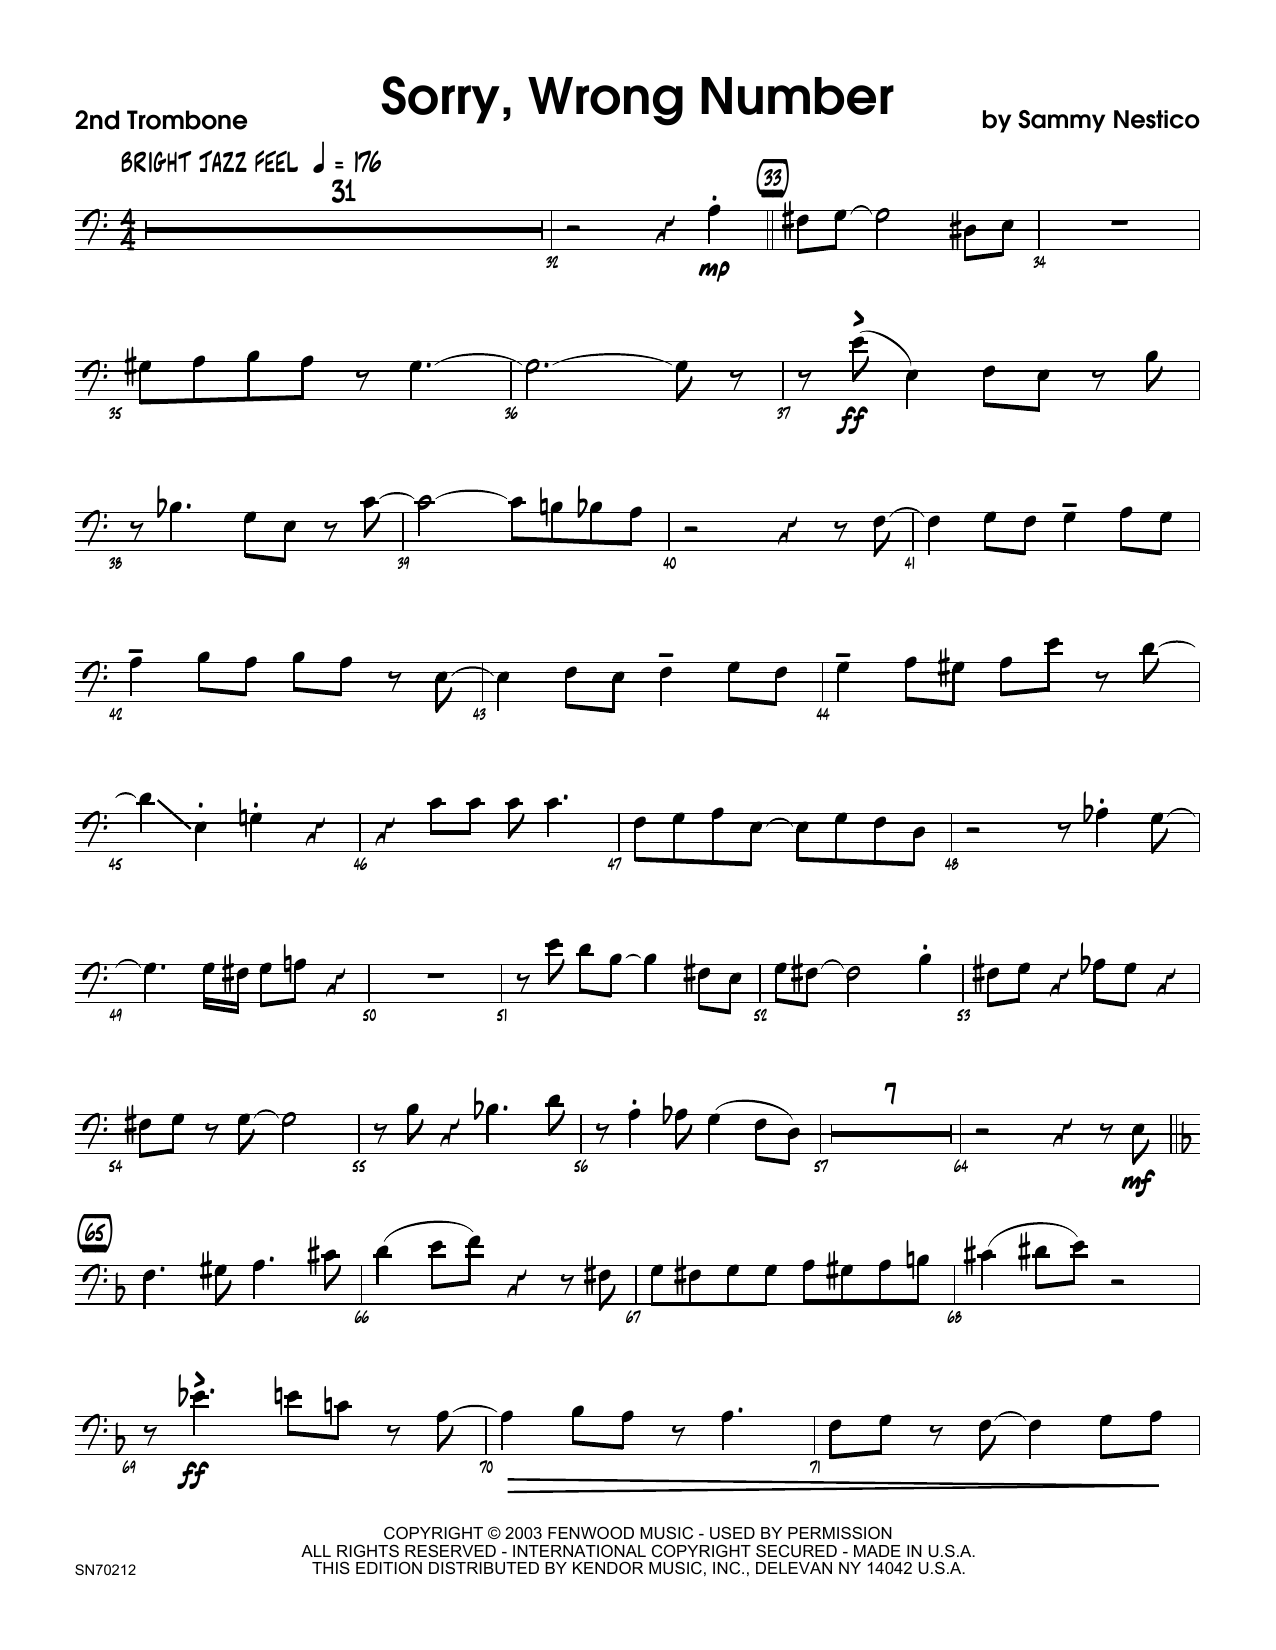 Download Sammy Nestico Sorry, Wrong Number - 2nd Trombone Sheet Music